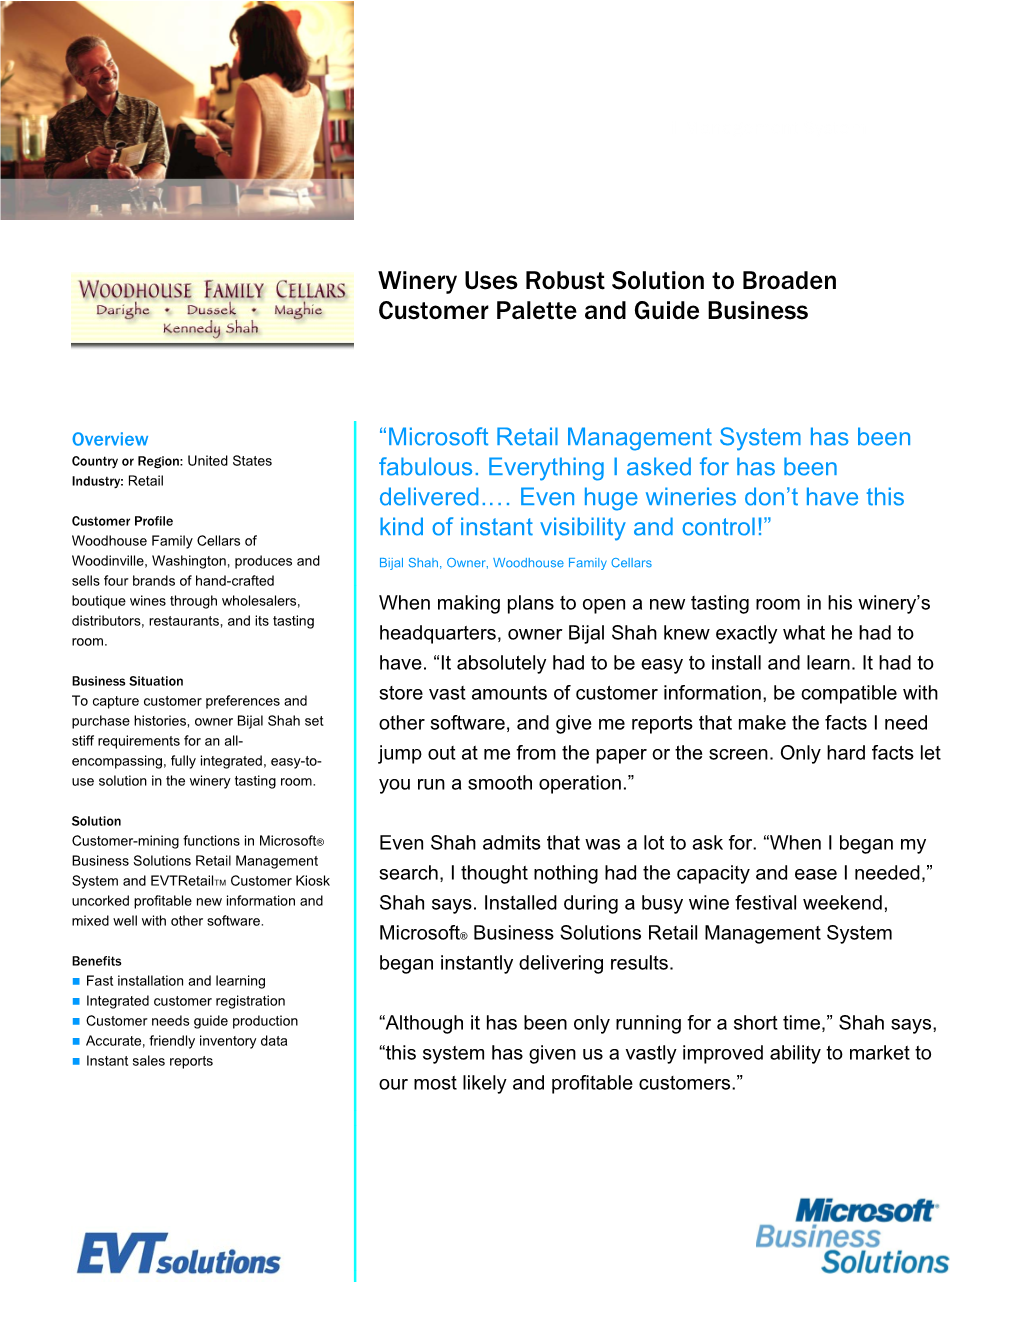 Winery Uses Robust Solution to Broaden Customer Palette and Guide Business